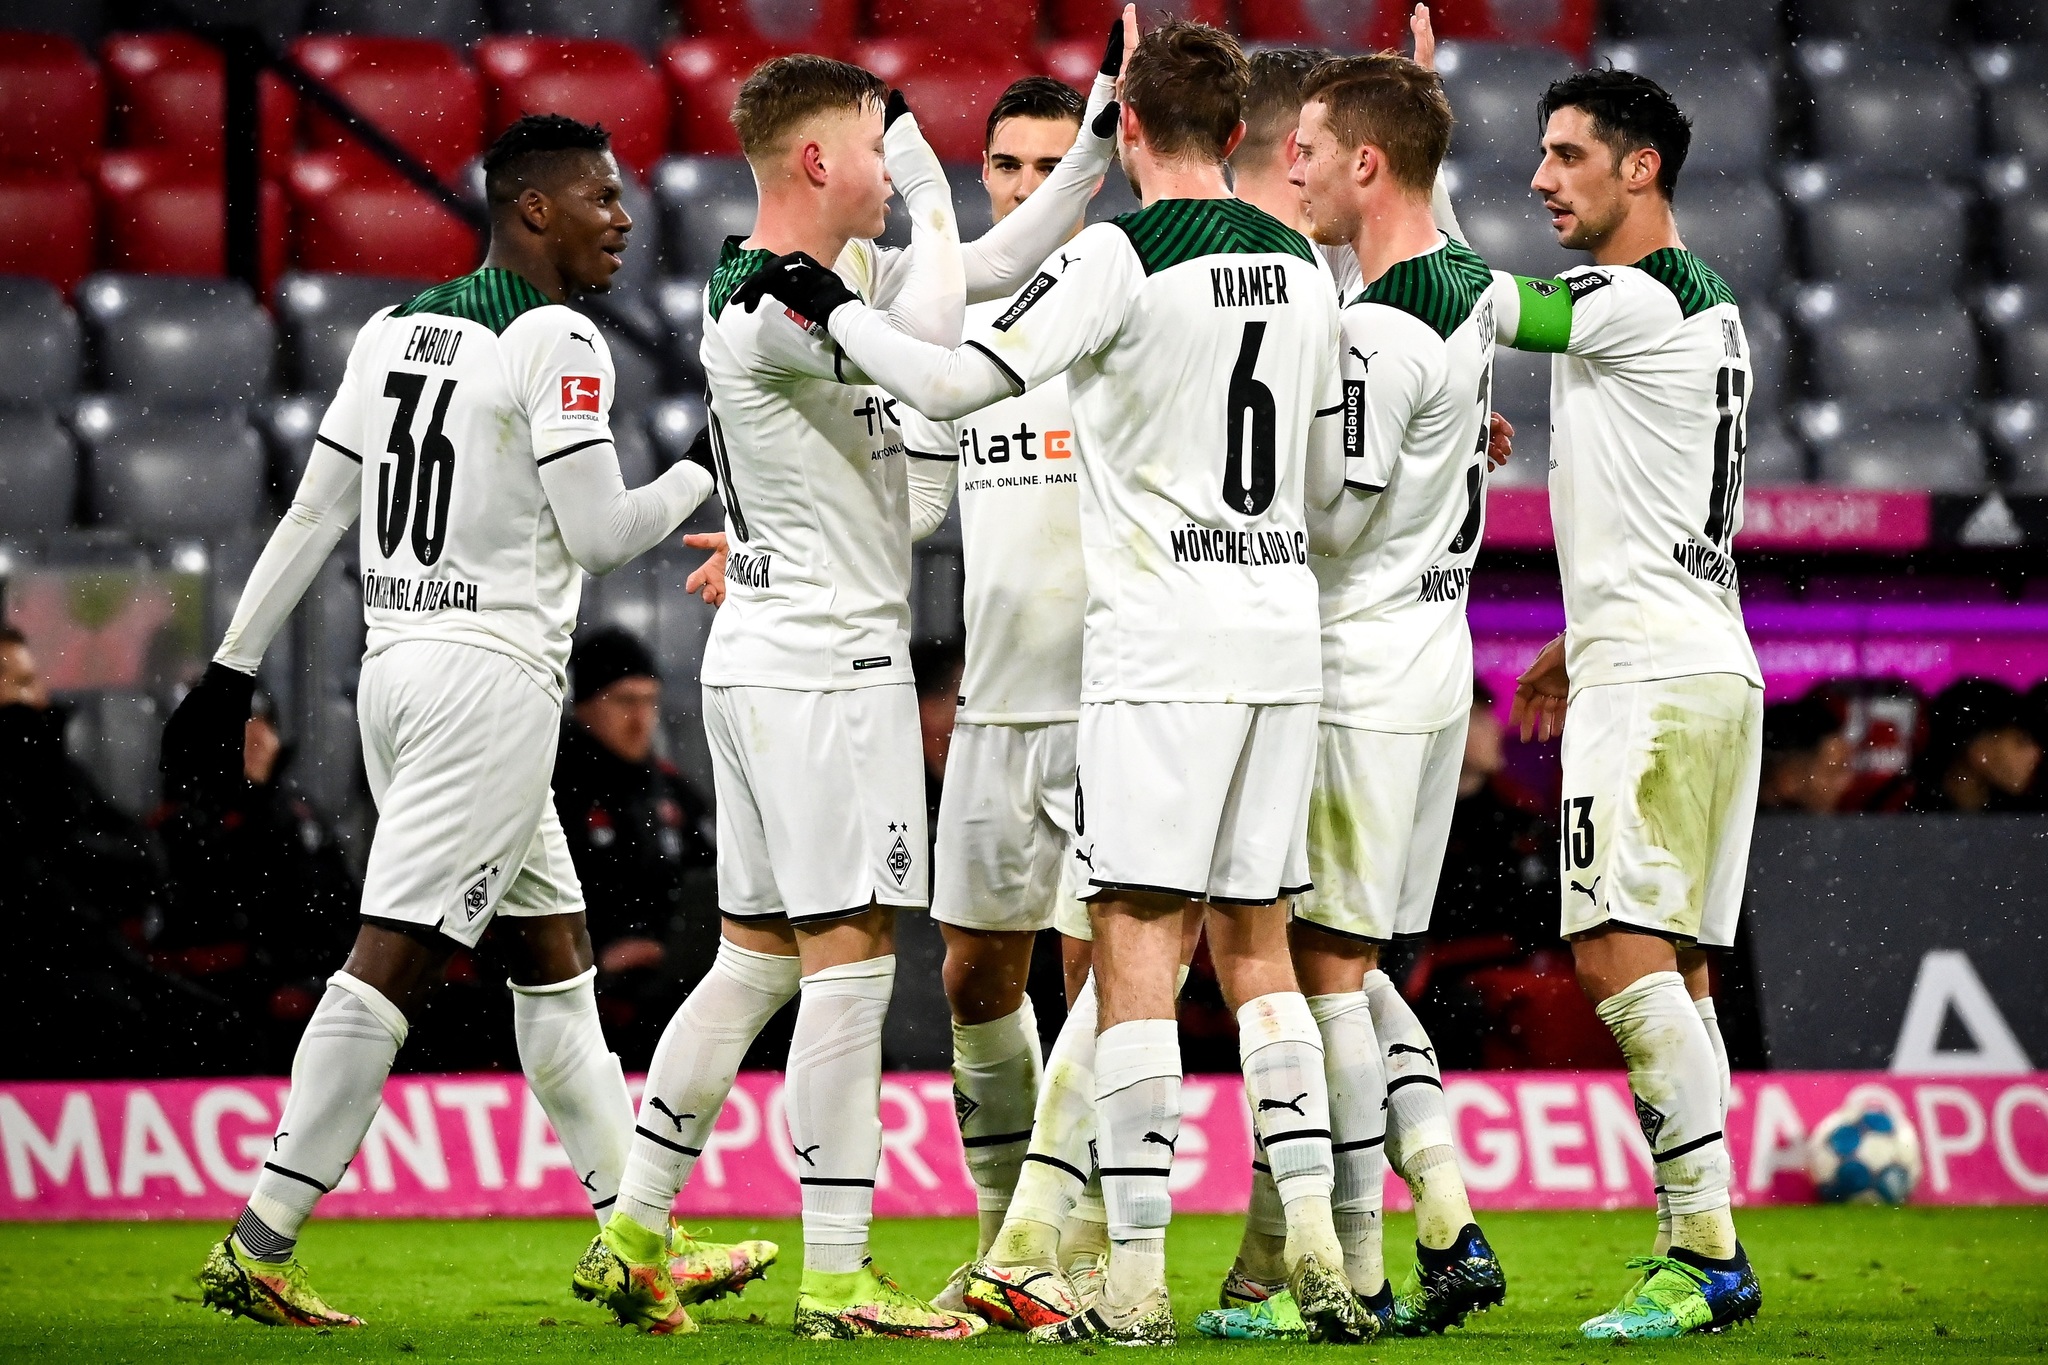 Moenchengladbach players celebrate taking a 2-1 lead